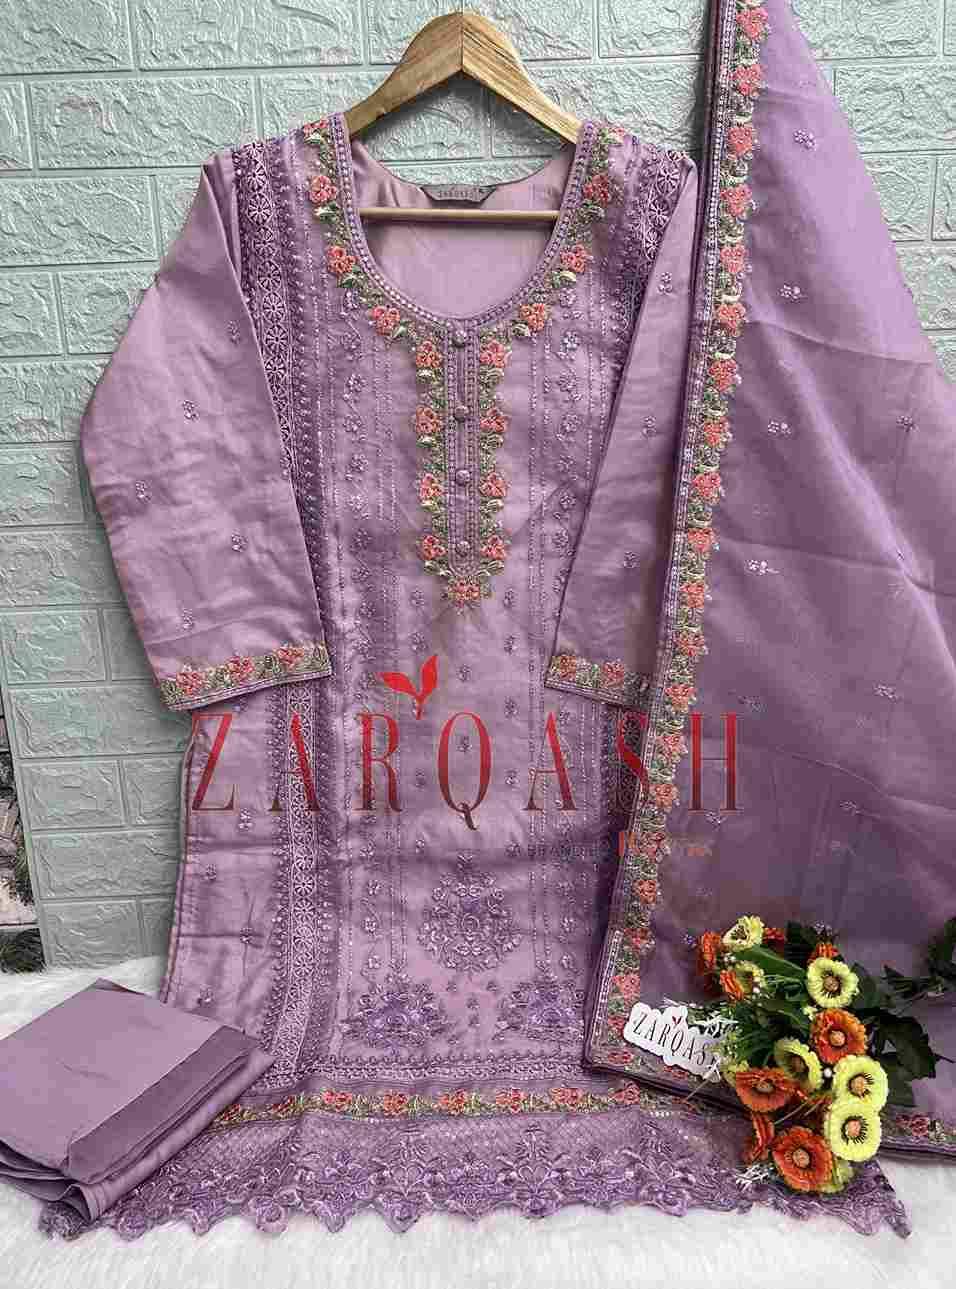 Zarqash Hit Design Z-196 Colours By Zarqash Z-196-A To Z-196-B Series Beautiful Pakistani Suits Colorful Stylish Fancy Casual Wear & Ethnic Wear Organza Dresses At Wholesale Price